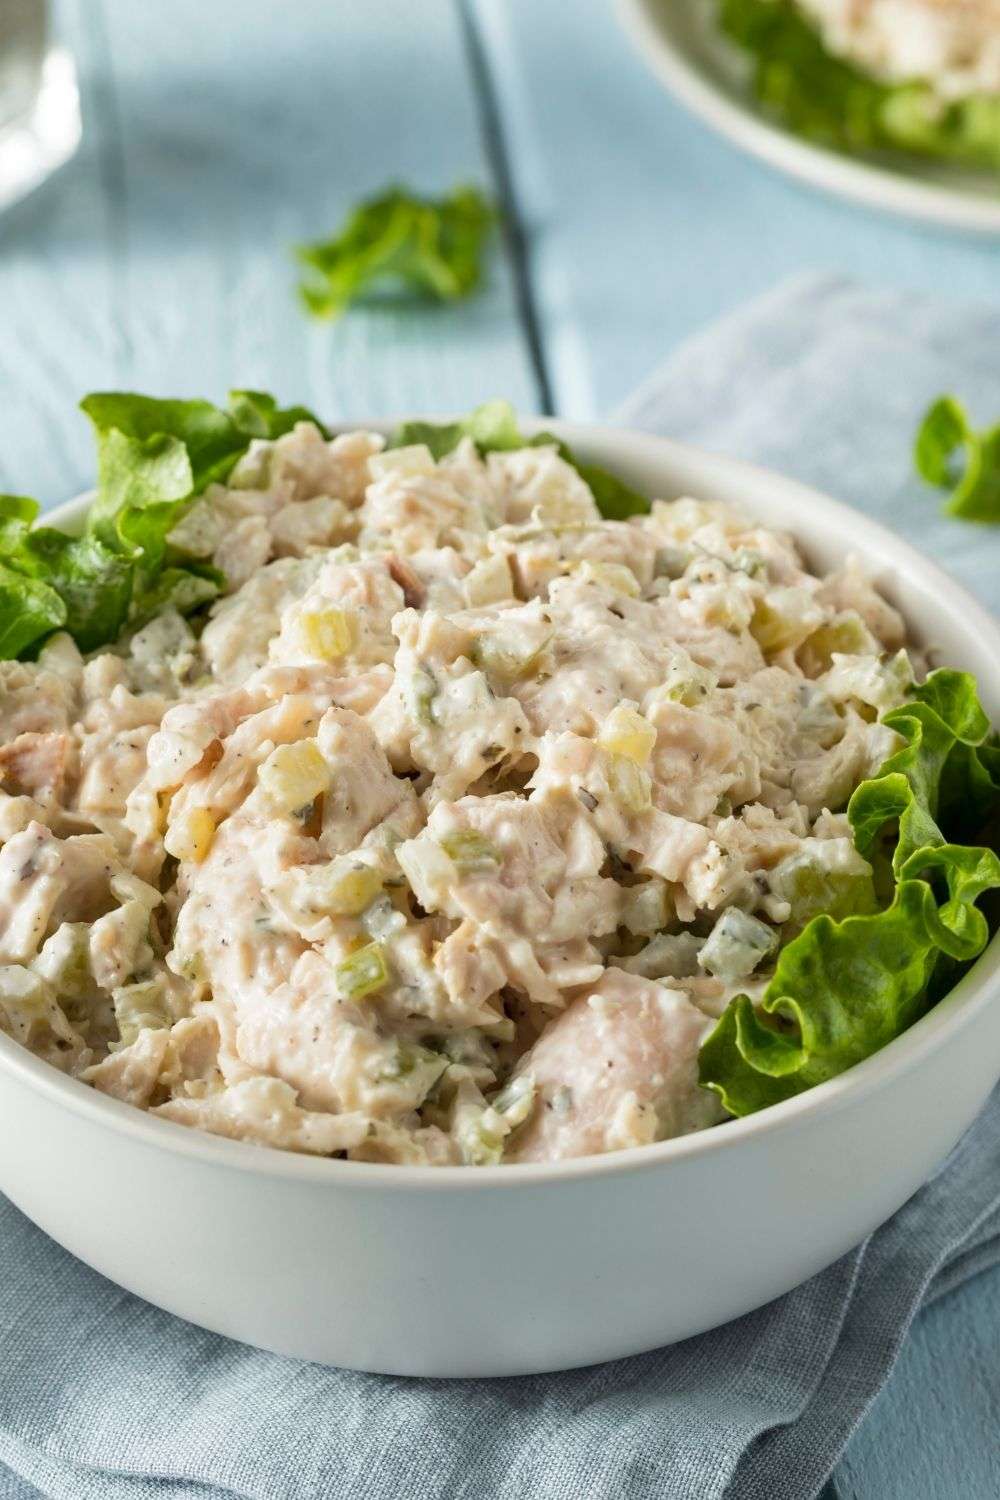 Easy Basic Chicken Salad Recipe without Celery